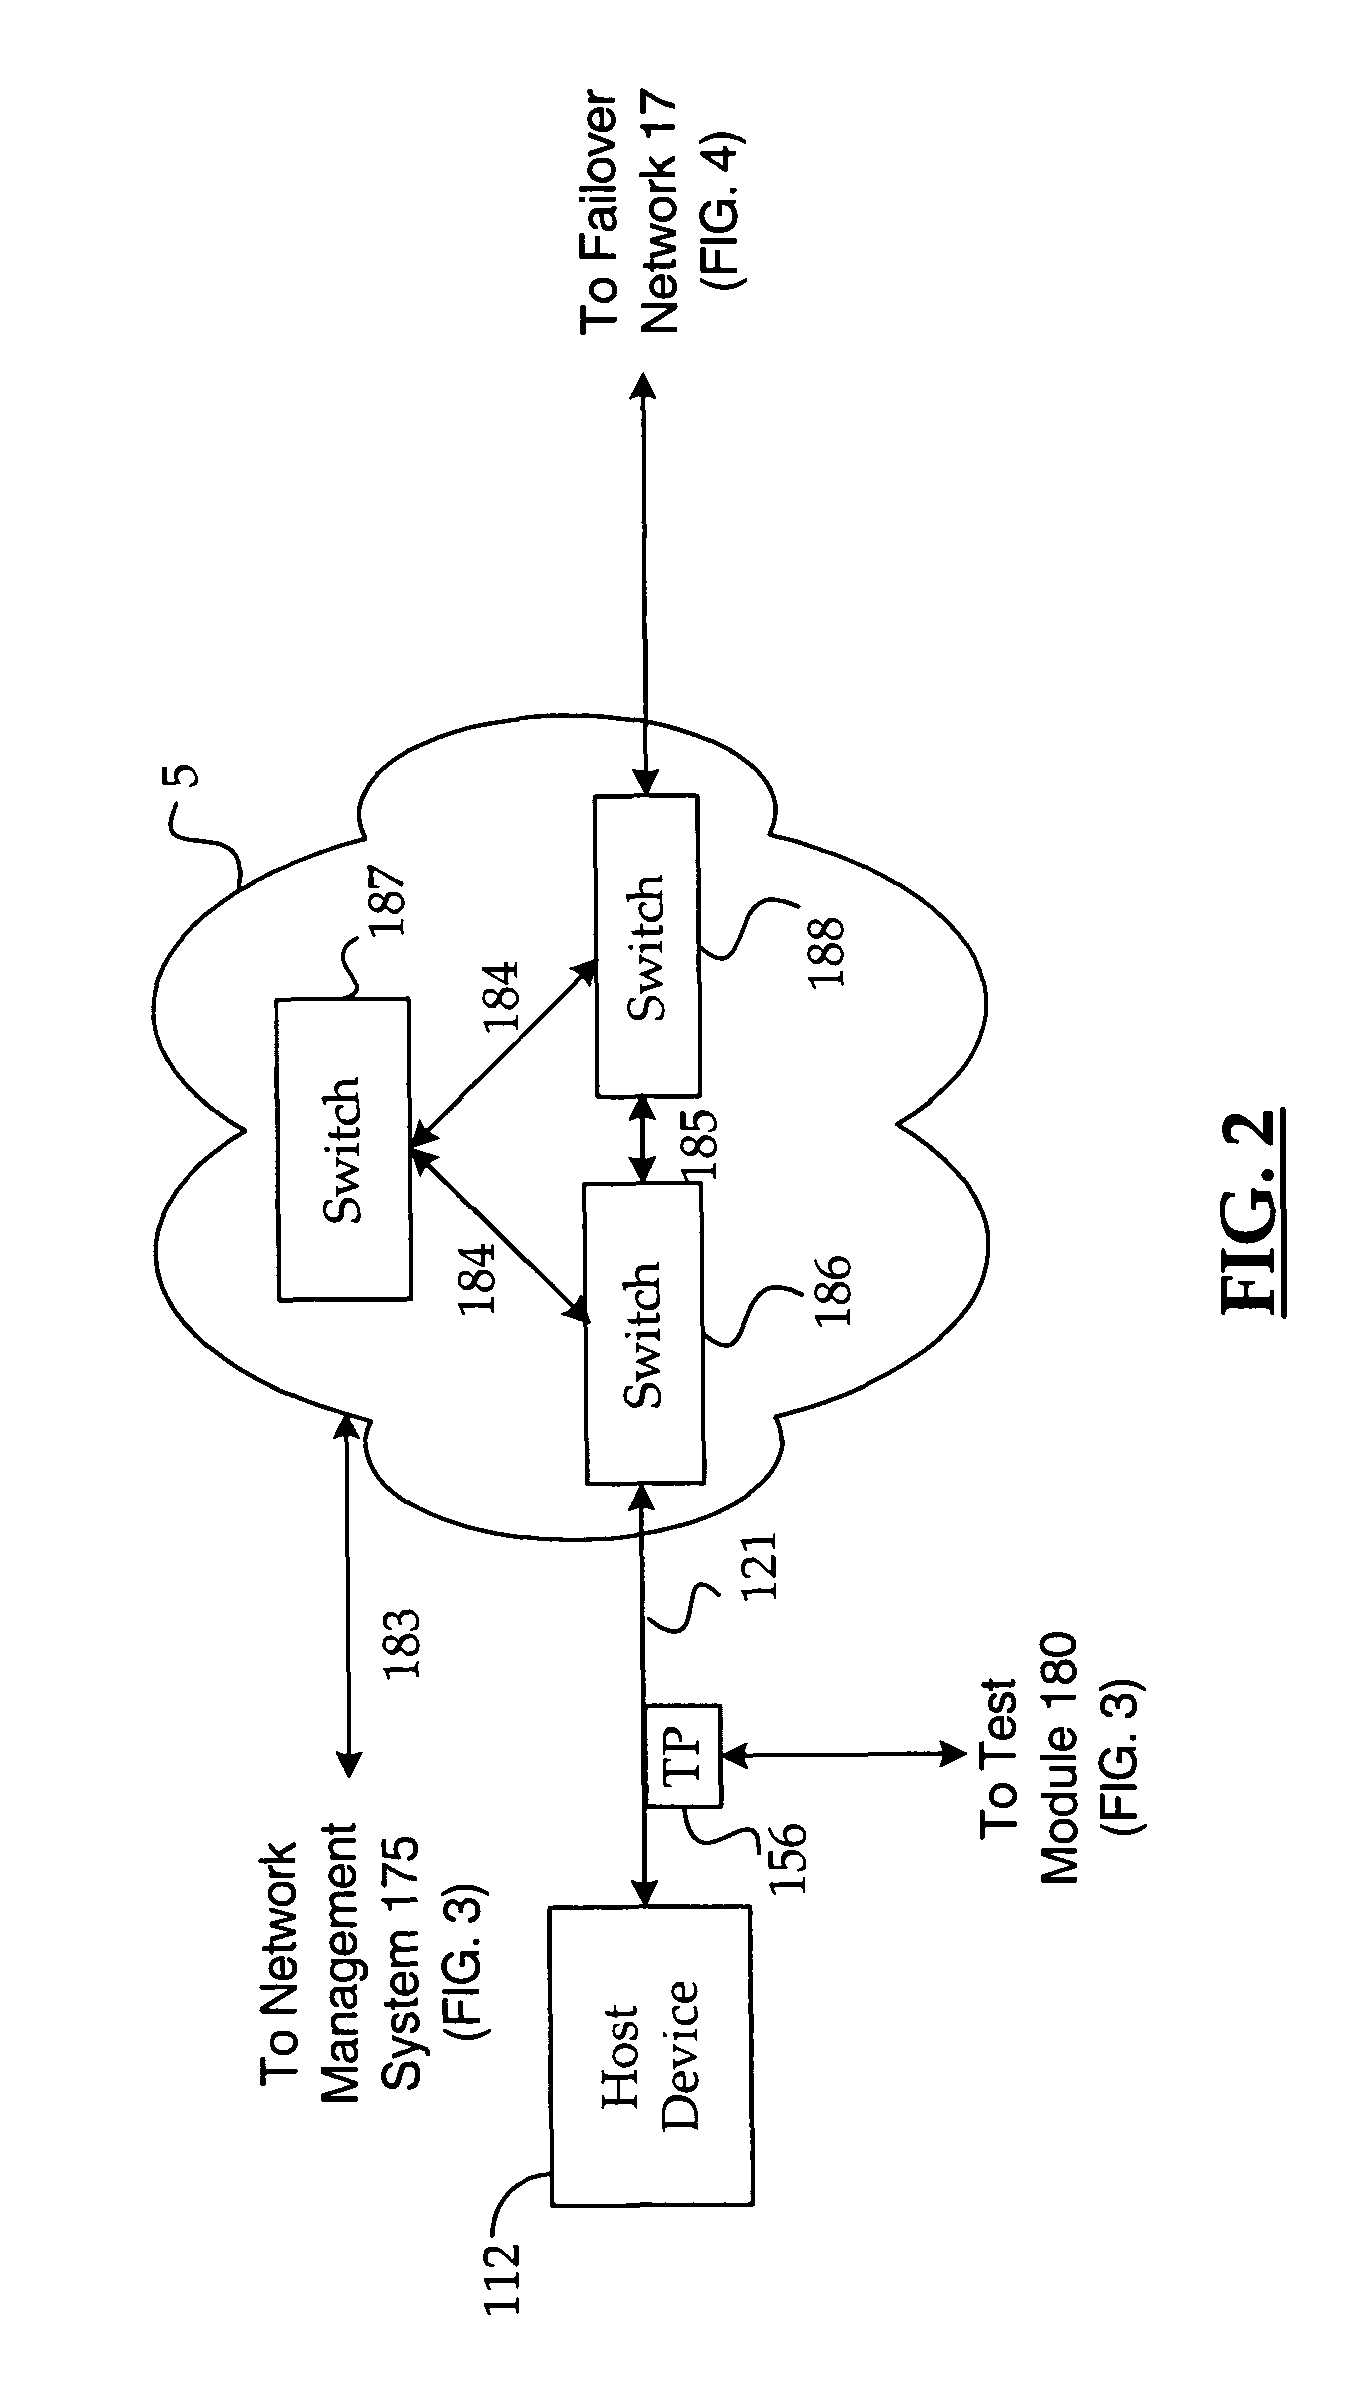 Method and system for automatically rerouting logical circuit data in a data network